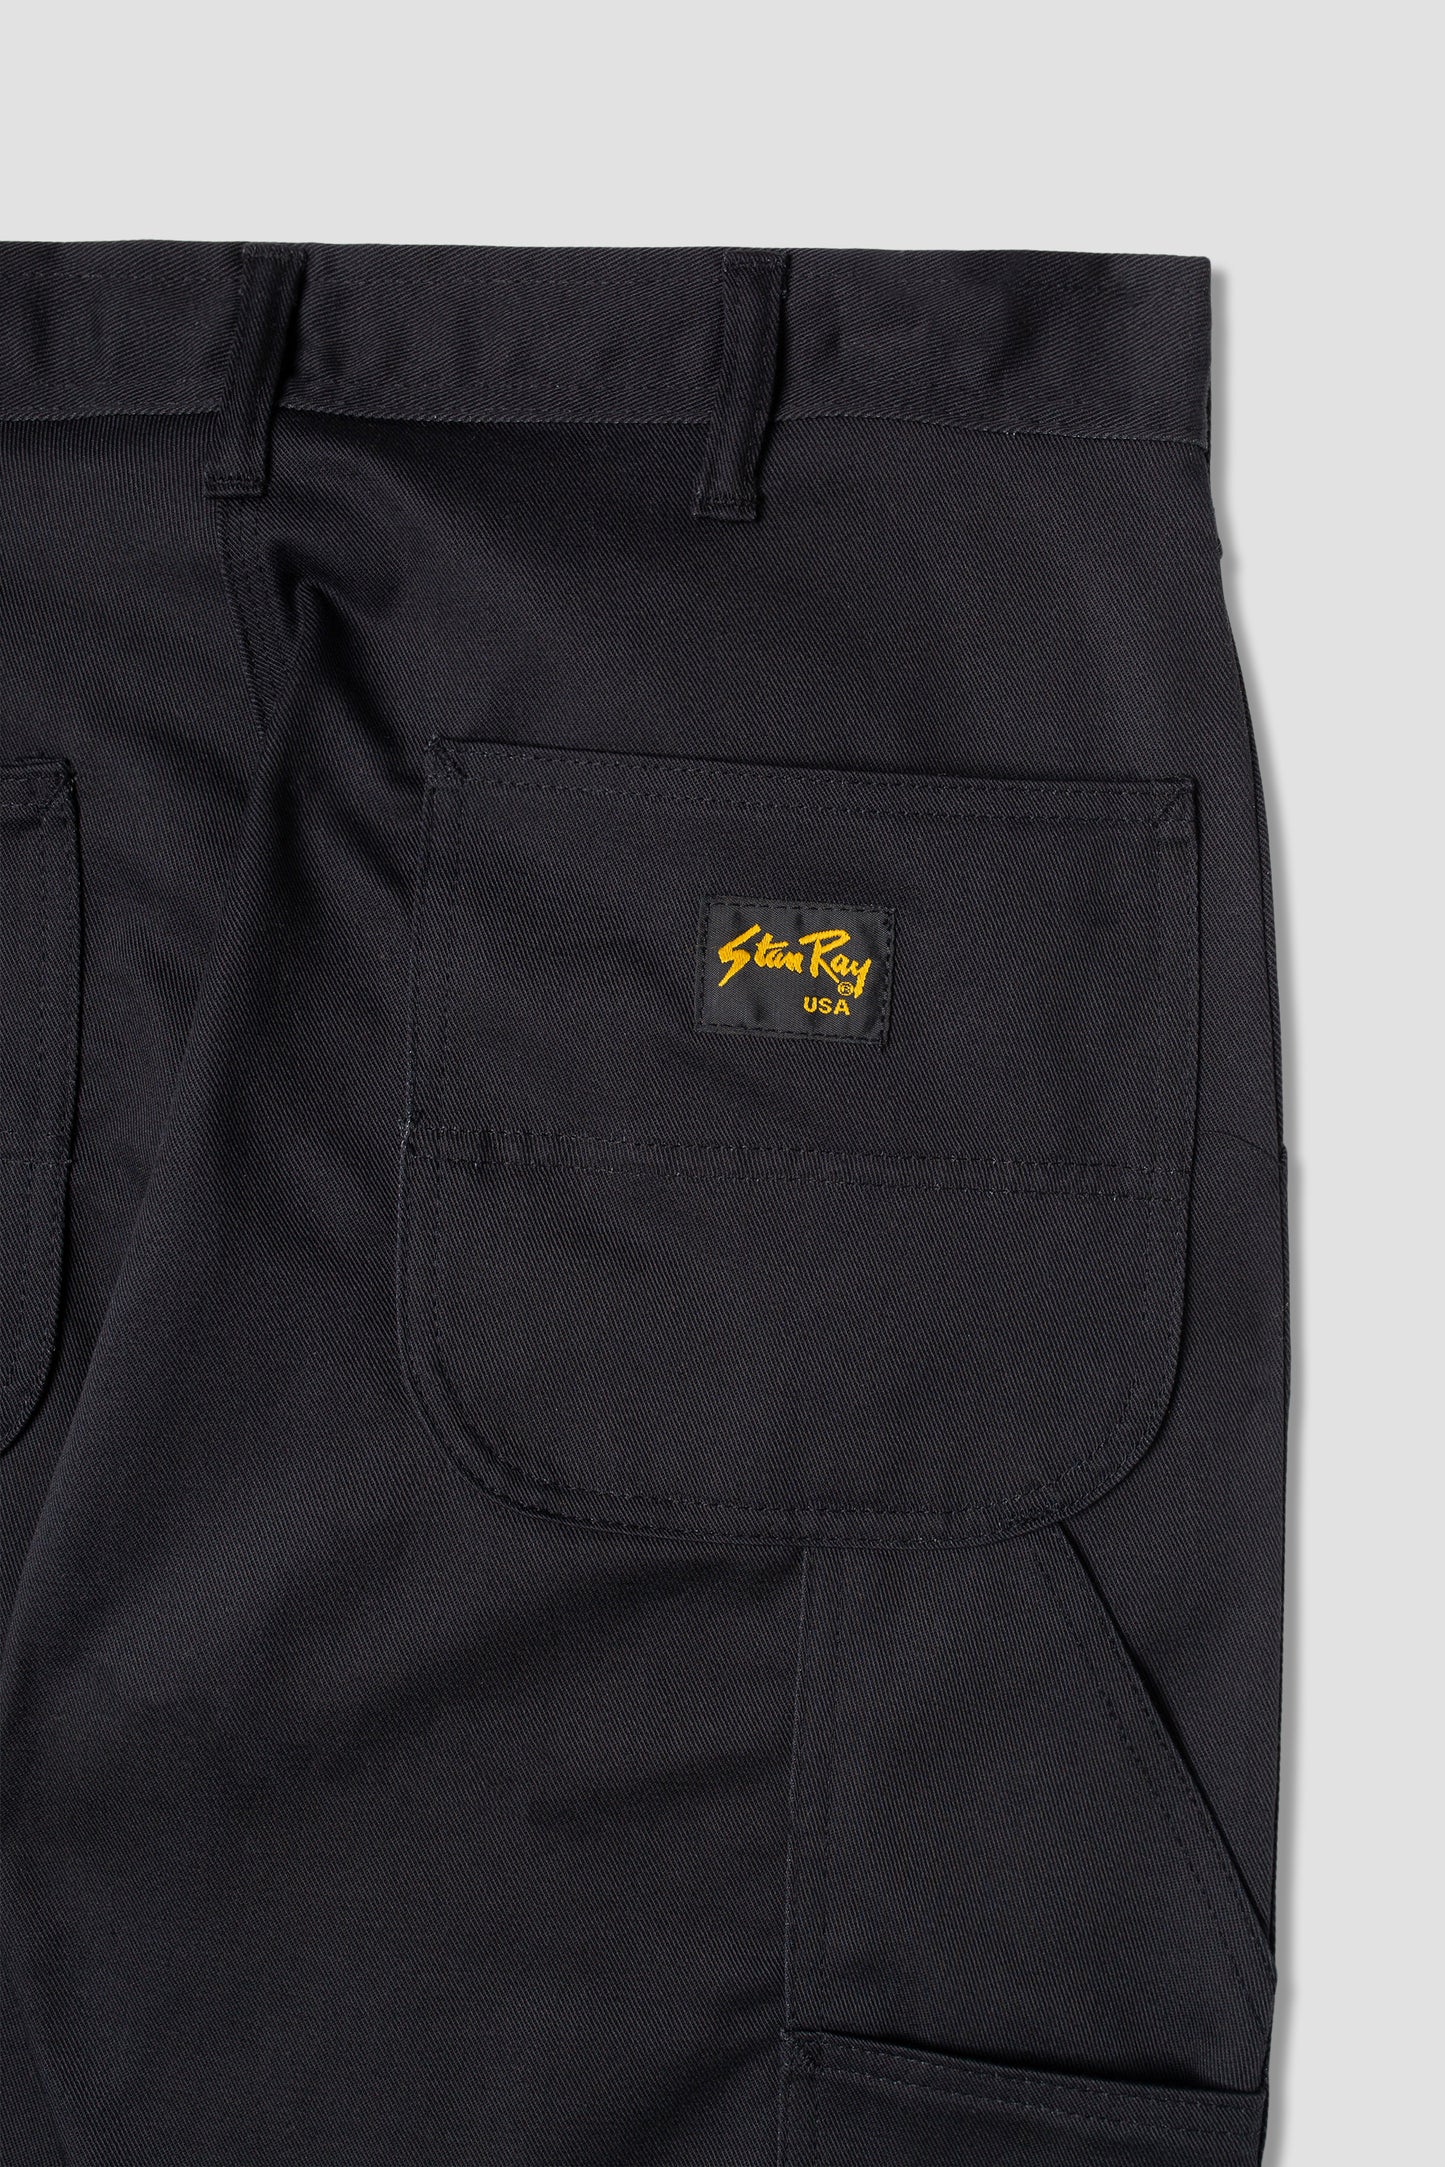 80s Painter Pant (Earl's Black Twill) - Stan Ray